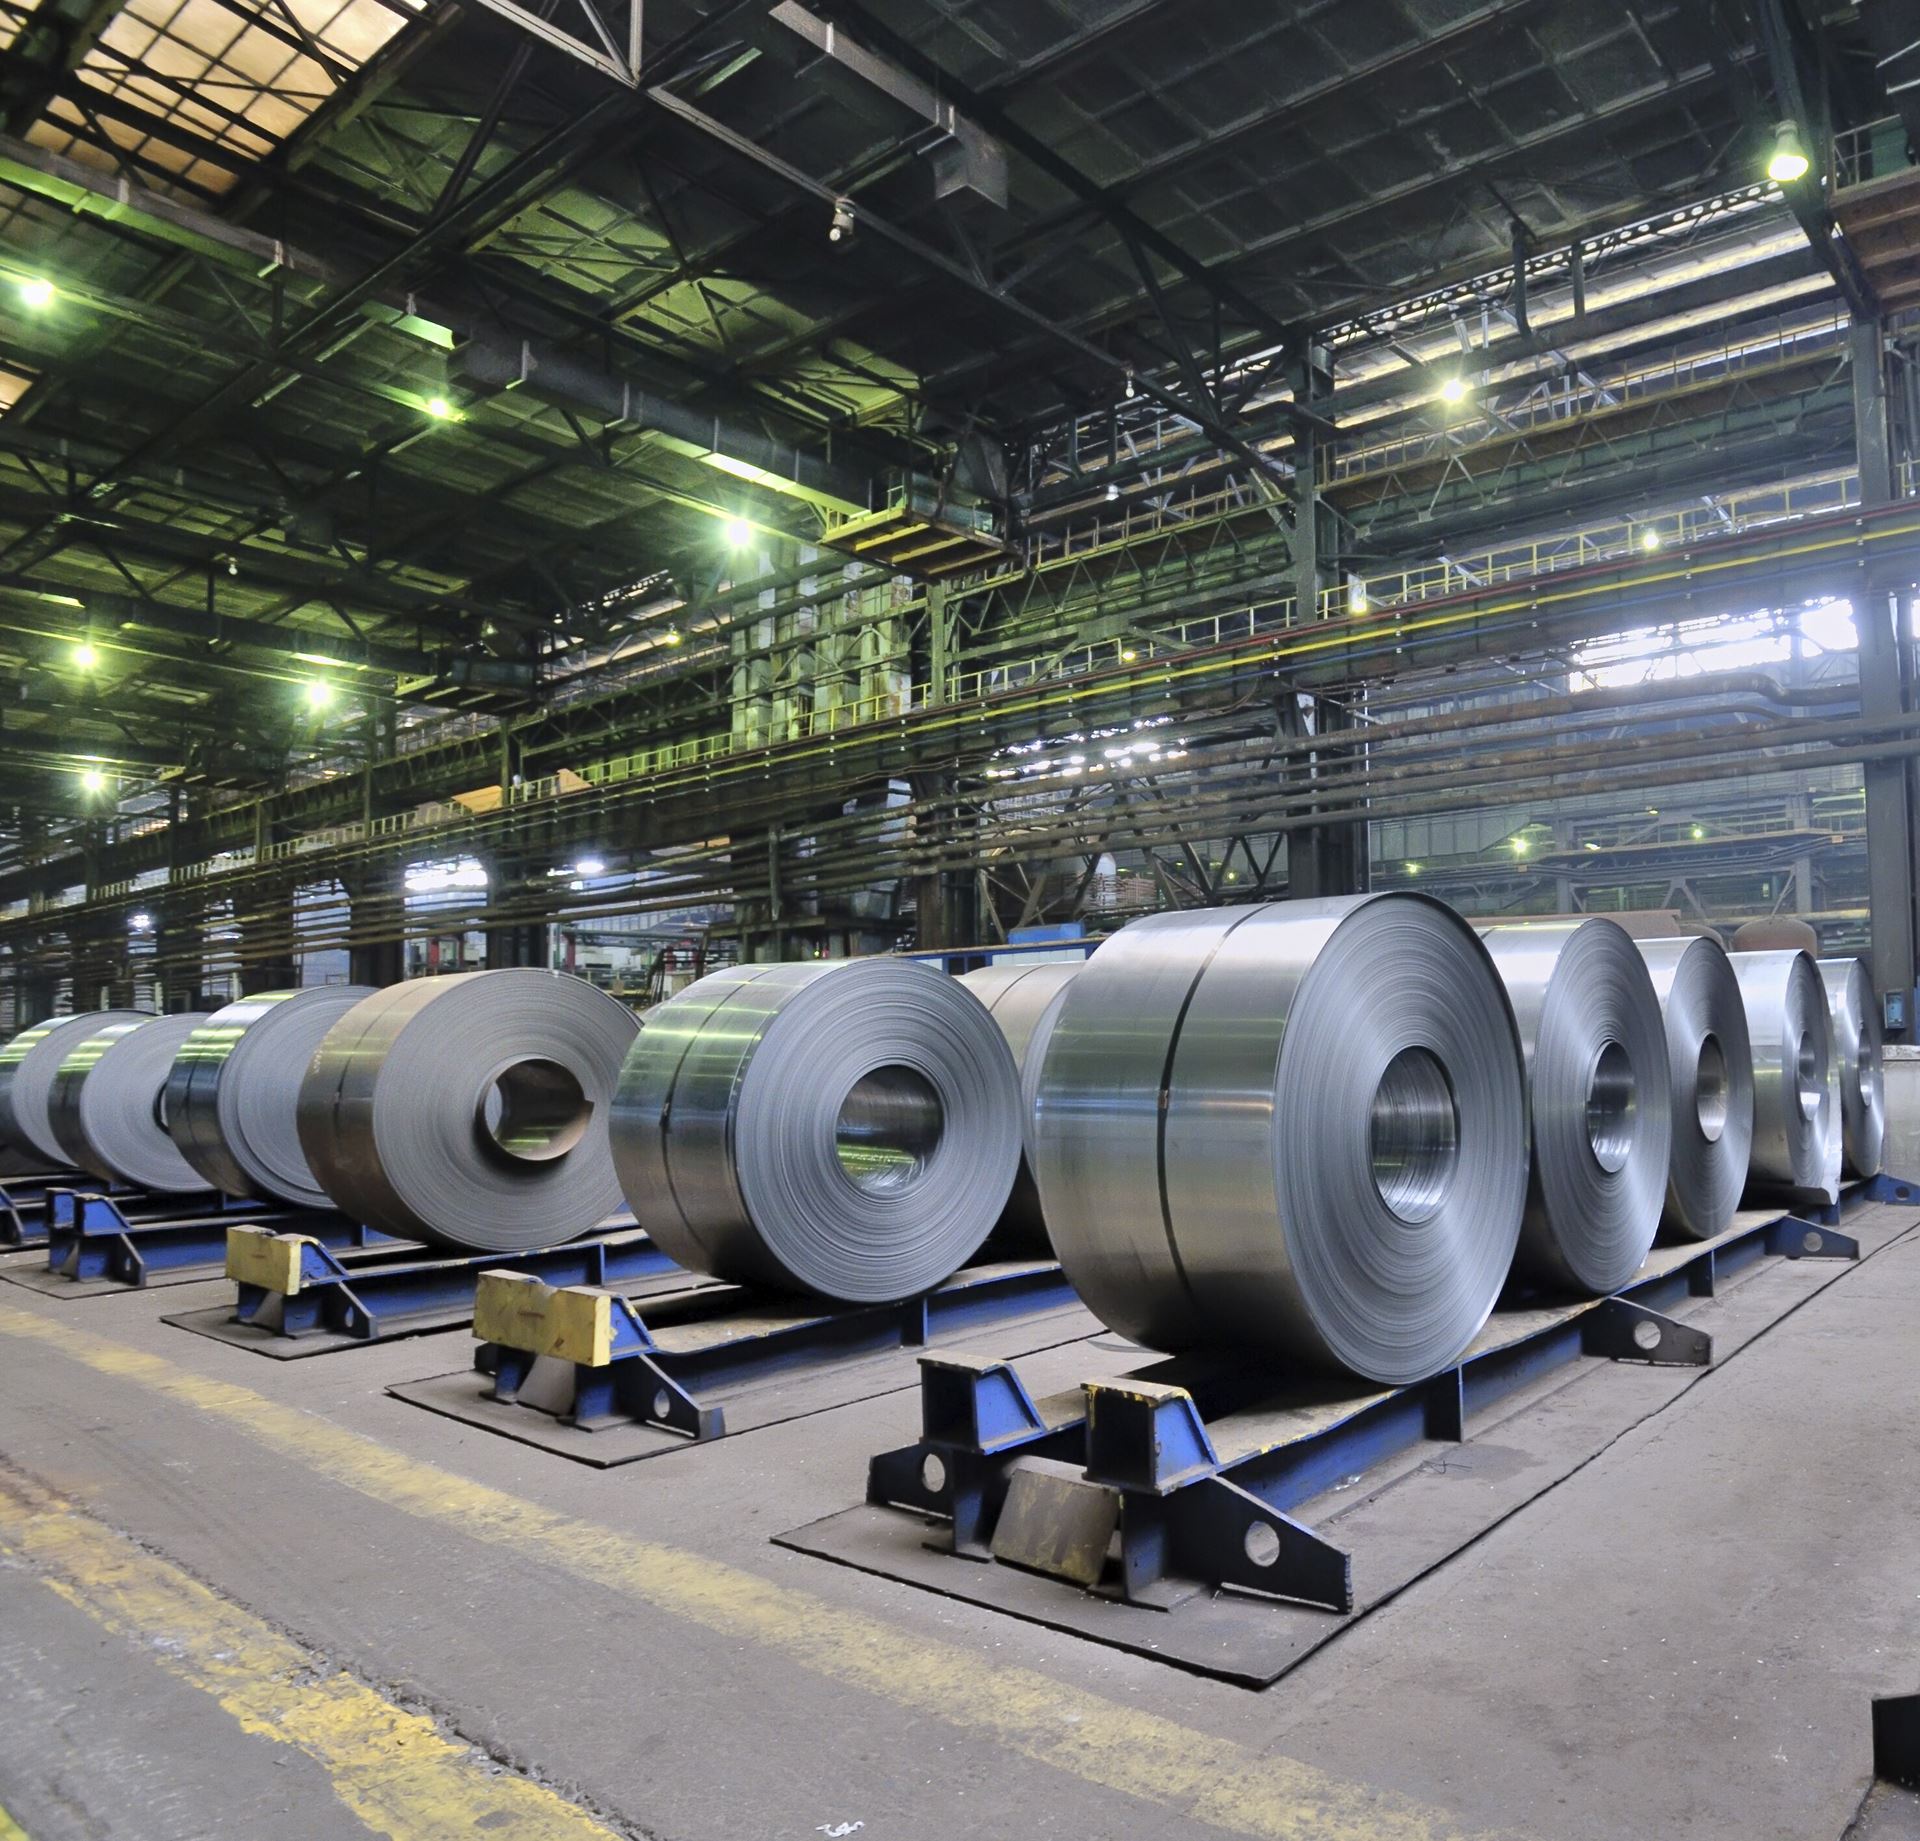 Algeria's steel industry expands with focus on flats